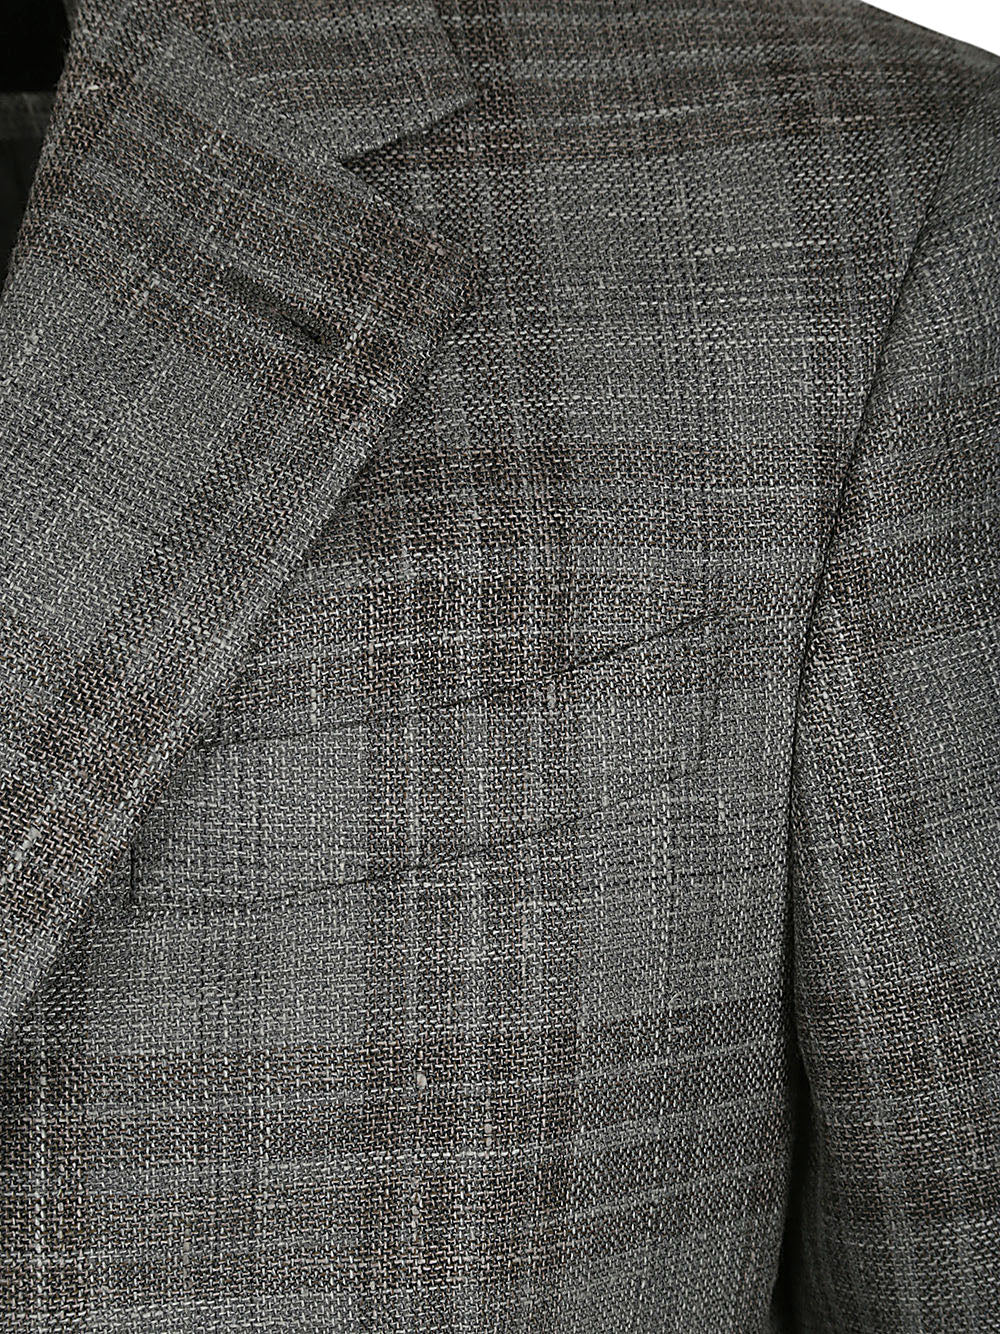 Wool And Silk Blend Jacket